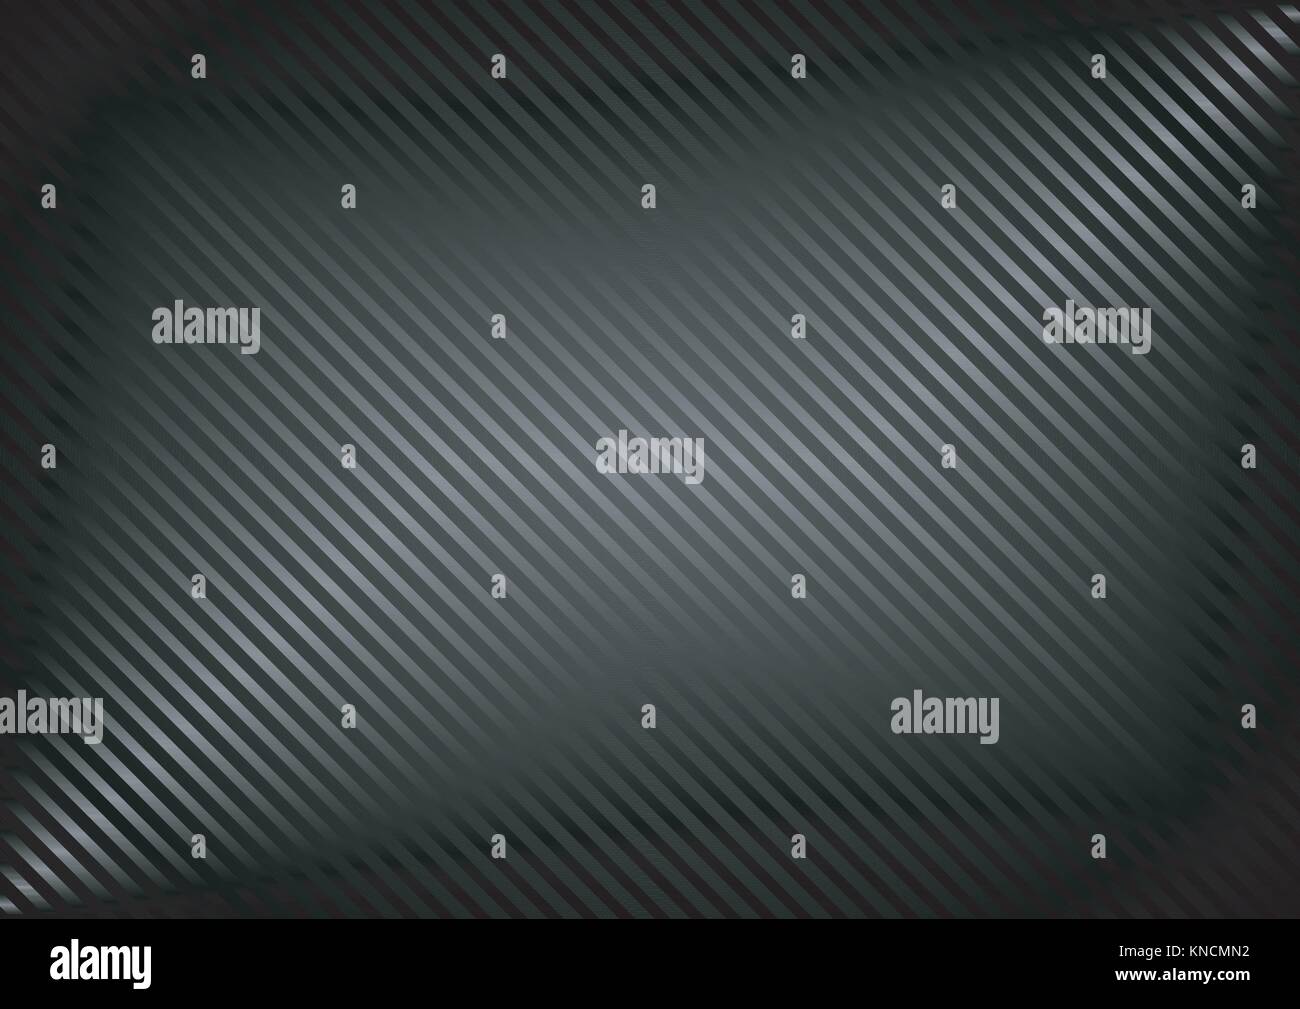 strip background design grey colored shiny Stock Vector